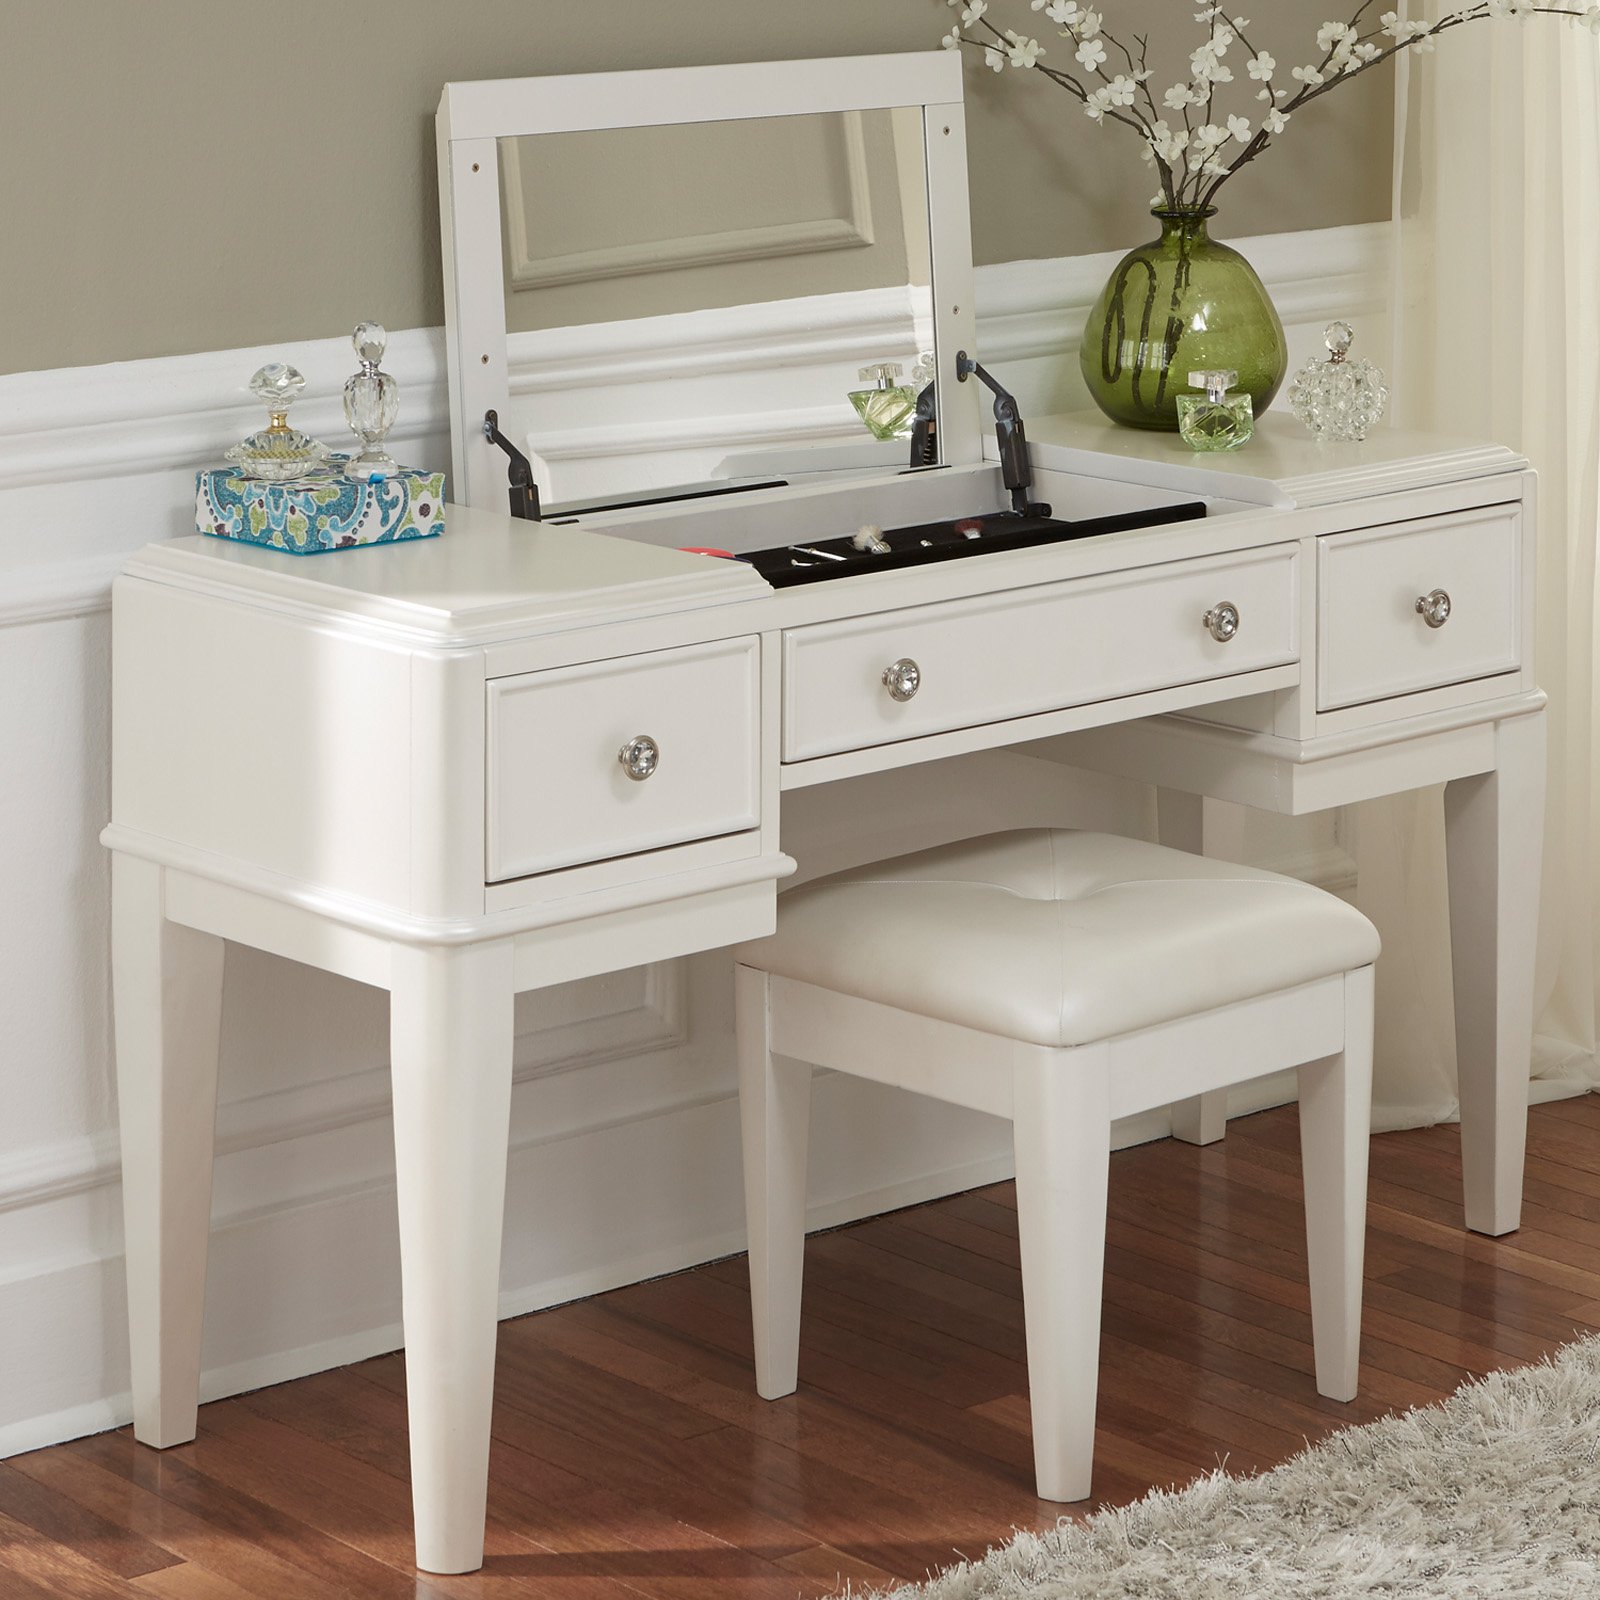 Liberty Furniture Stardust Bedroom Vanity with Optional Stool - Traveller Location